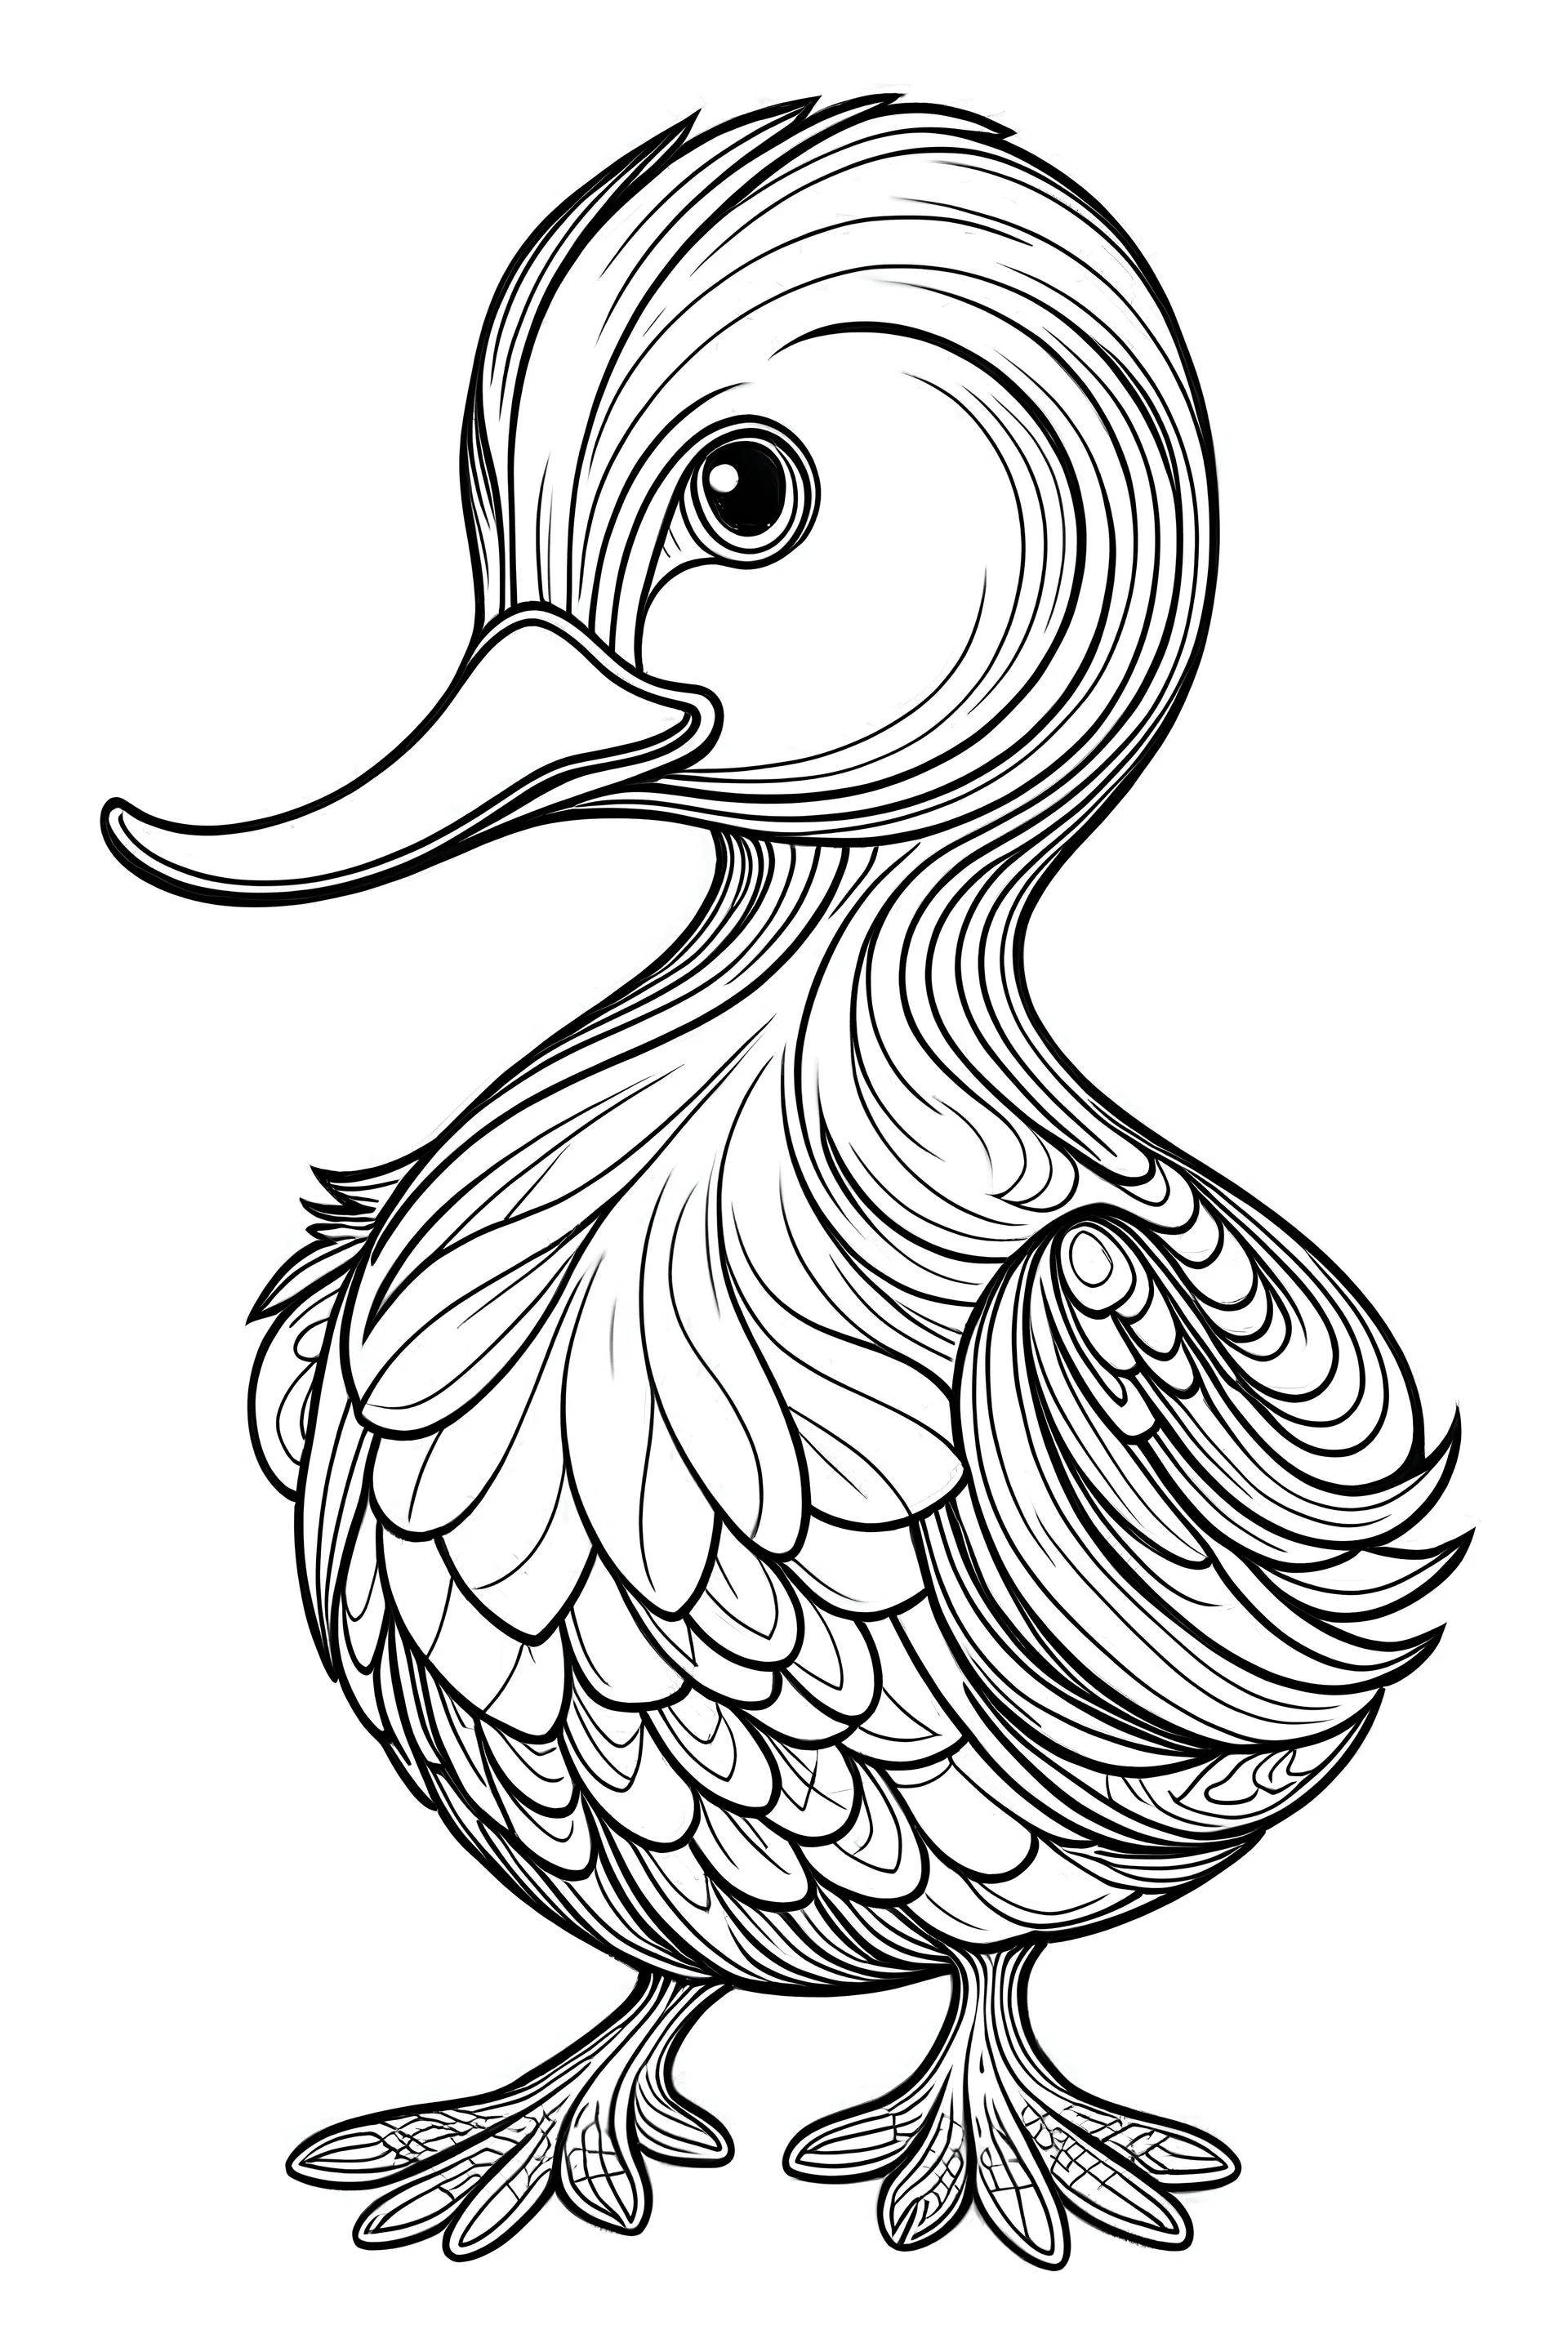 outline art for a cute duck coloring page, white background, Sketch style, full body, only use outline, Mandala style, clean line art, white background, no shadows and clear and well